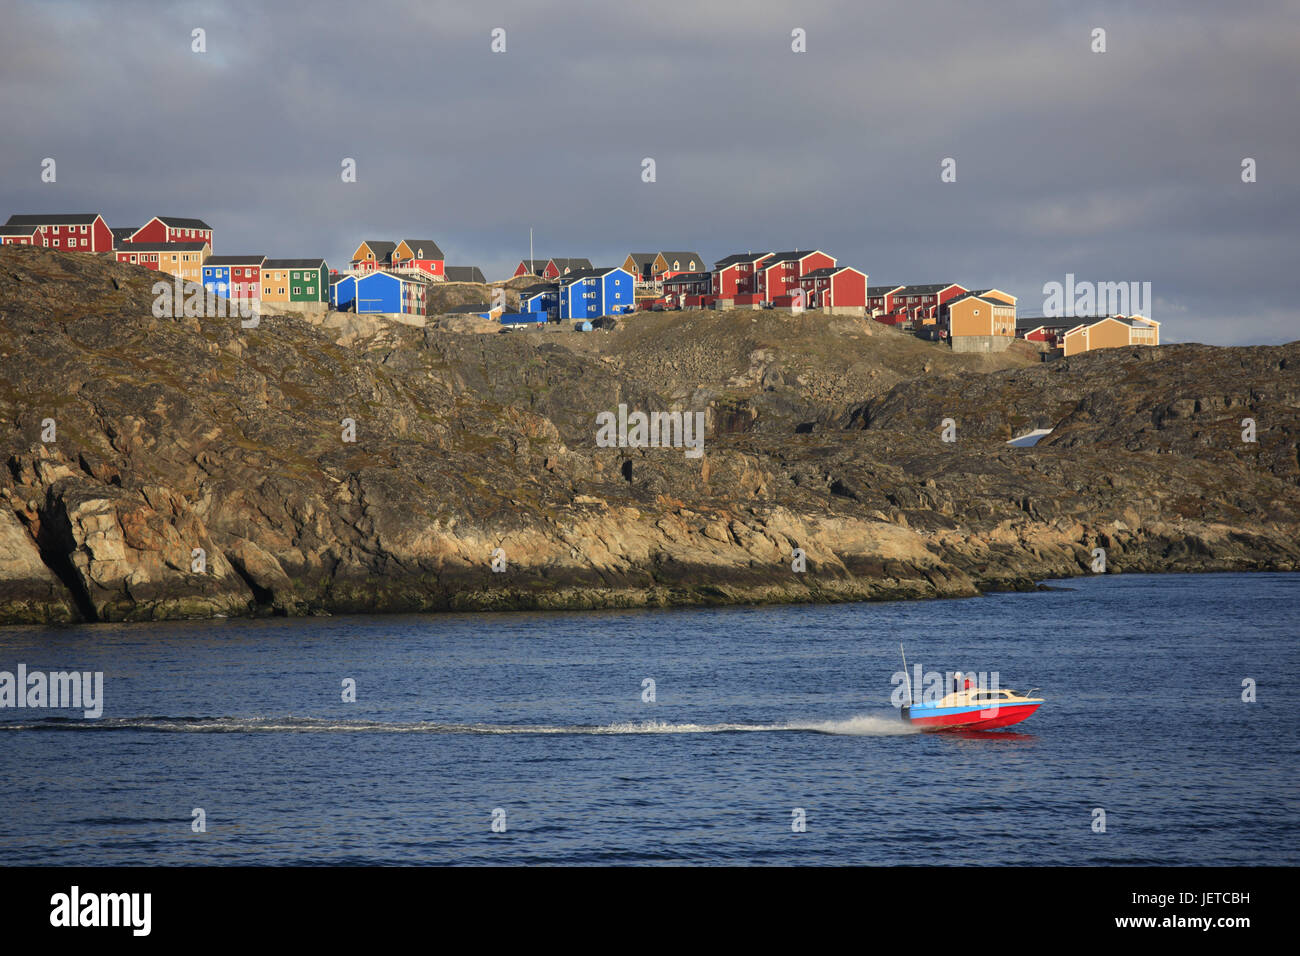 Greenland, Sisimiut, town view, timber houses, bile coast, sea, motorboat, Western Greenland, town, houses, residential houses, brightly, timber-frame construction way, water, boat, coast, rock, sky, cloudies, Stock Photo